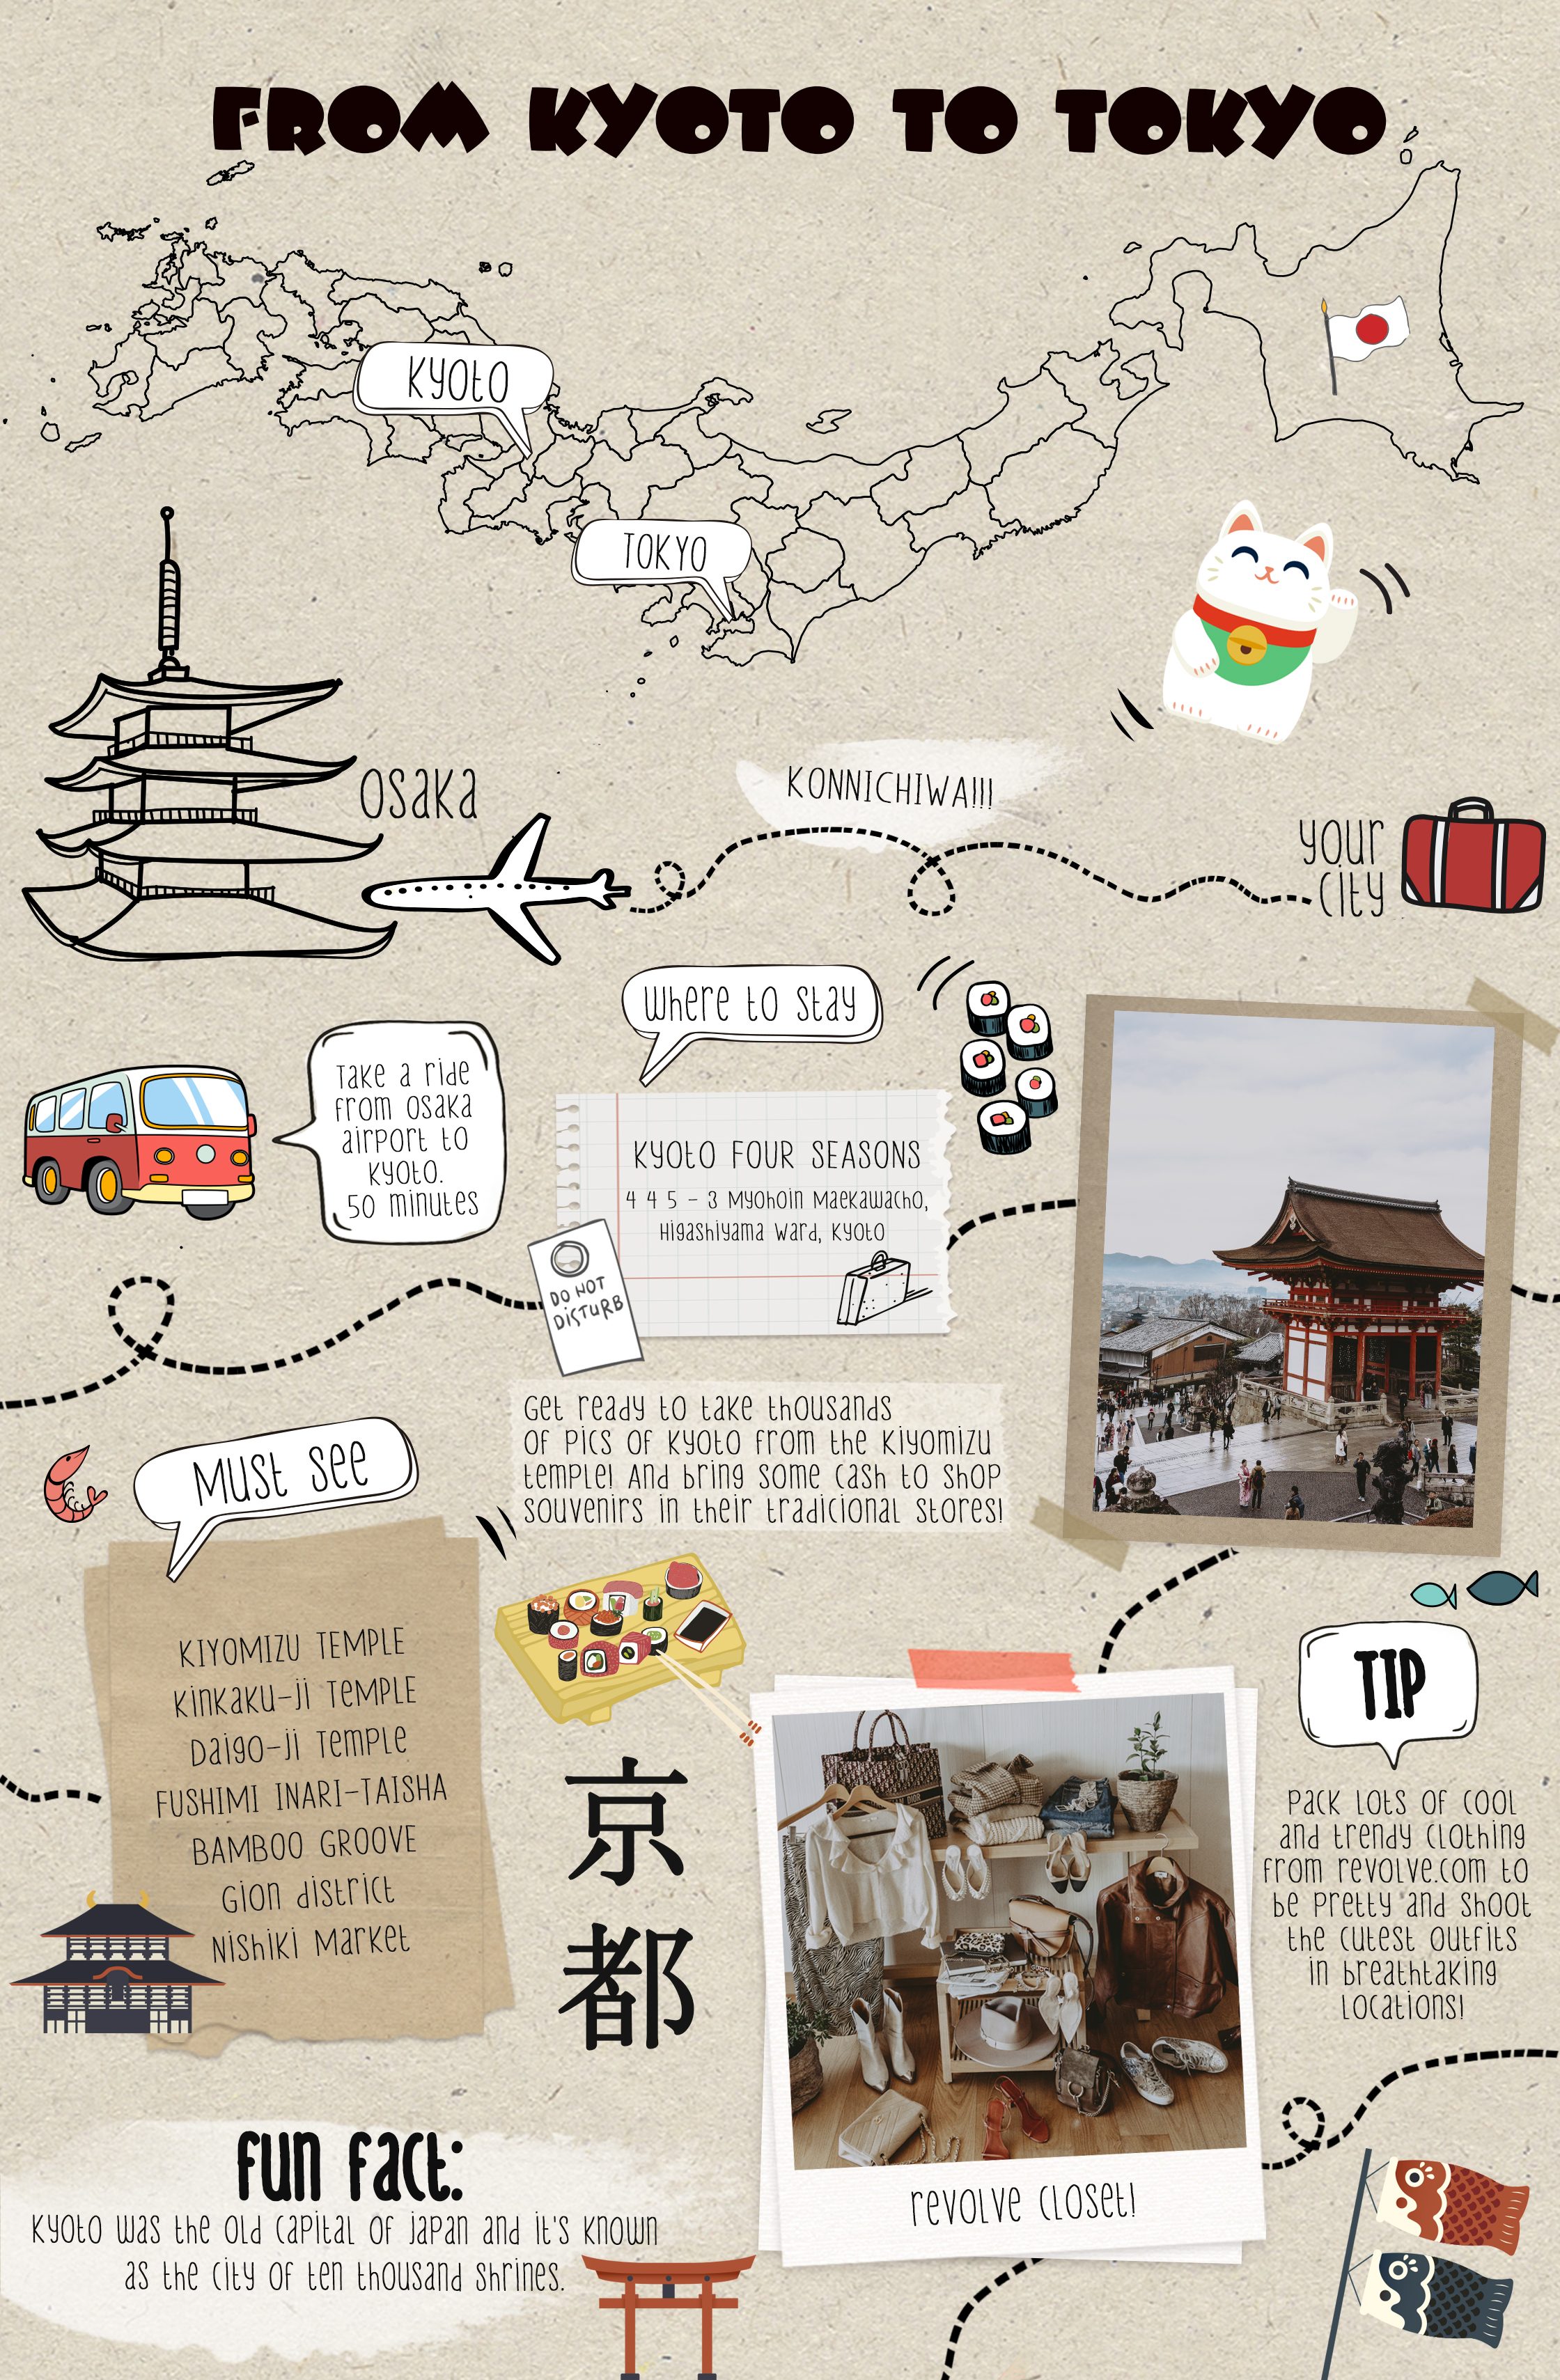 TRAVEL GUIDE: From Kyoto to TOkyo